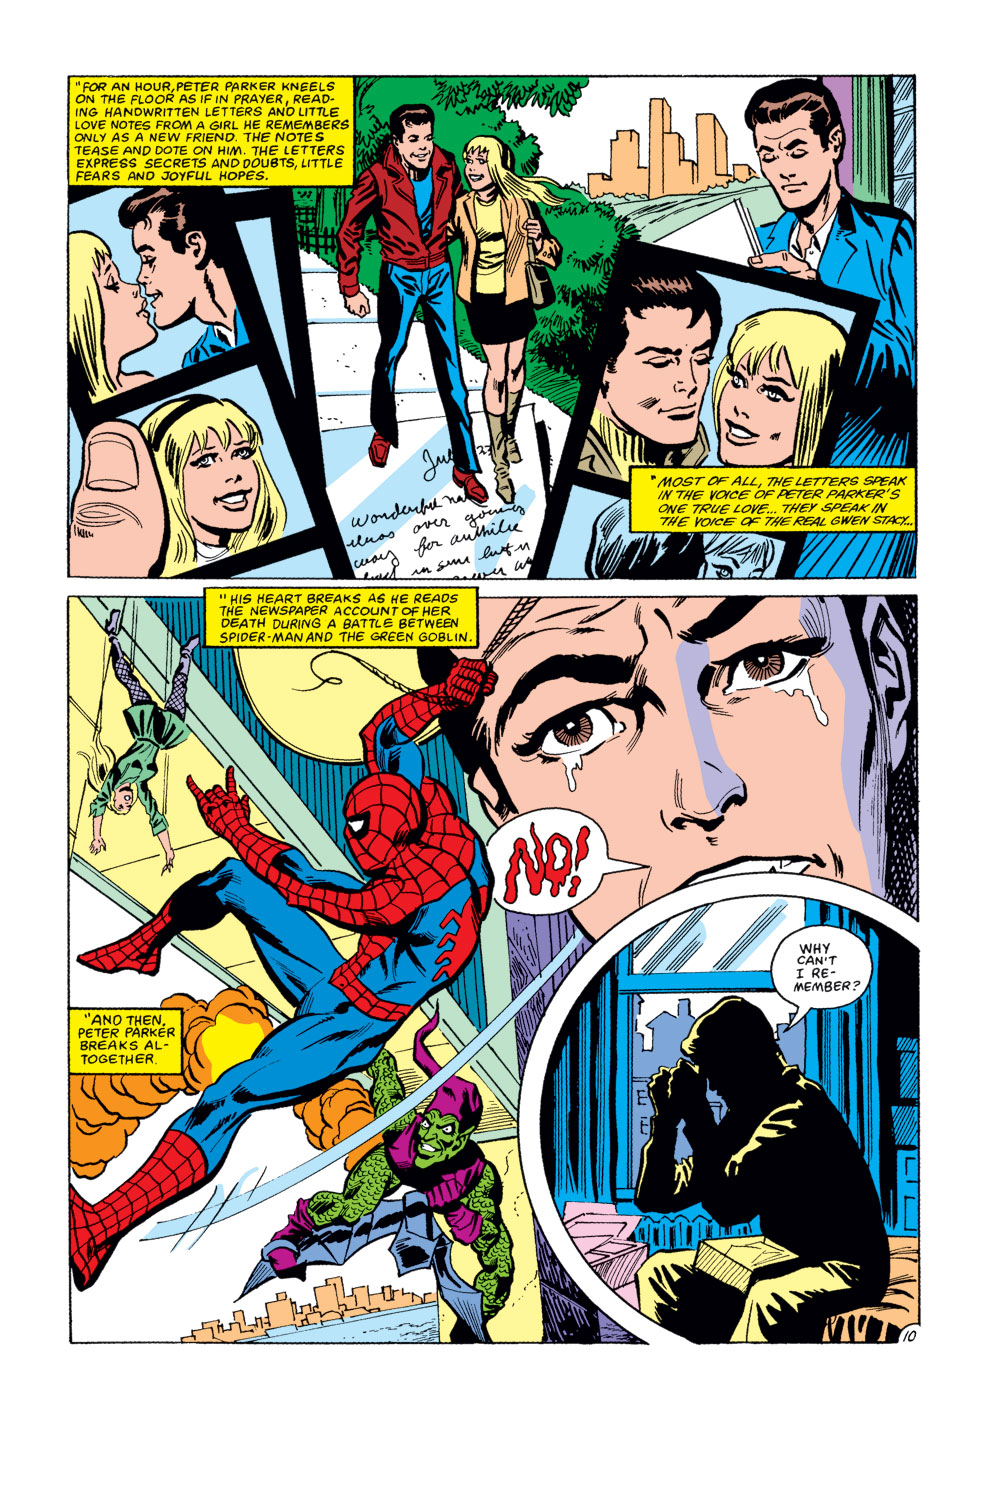 What If? (1977) issue 30 - Spider-Man's clone lived - Page 11